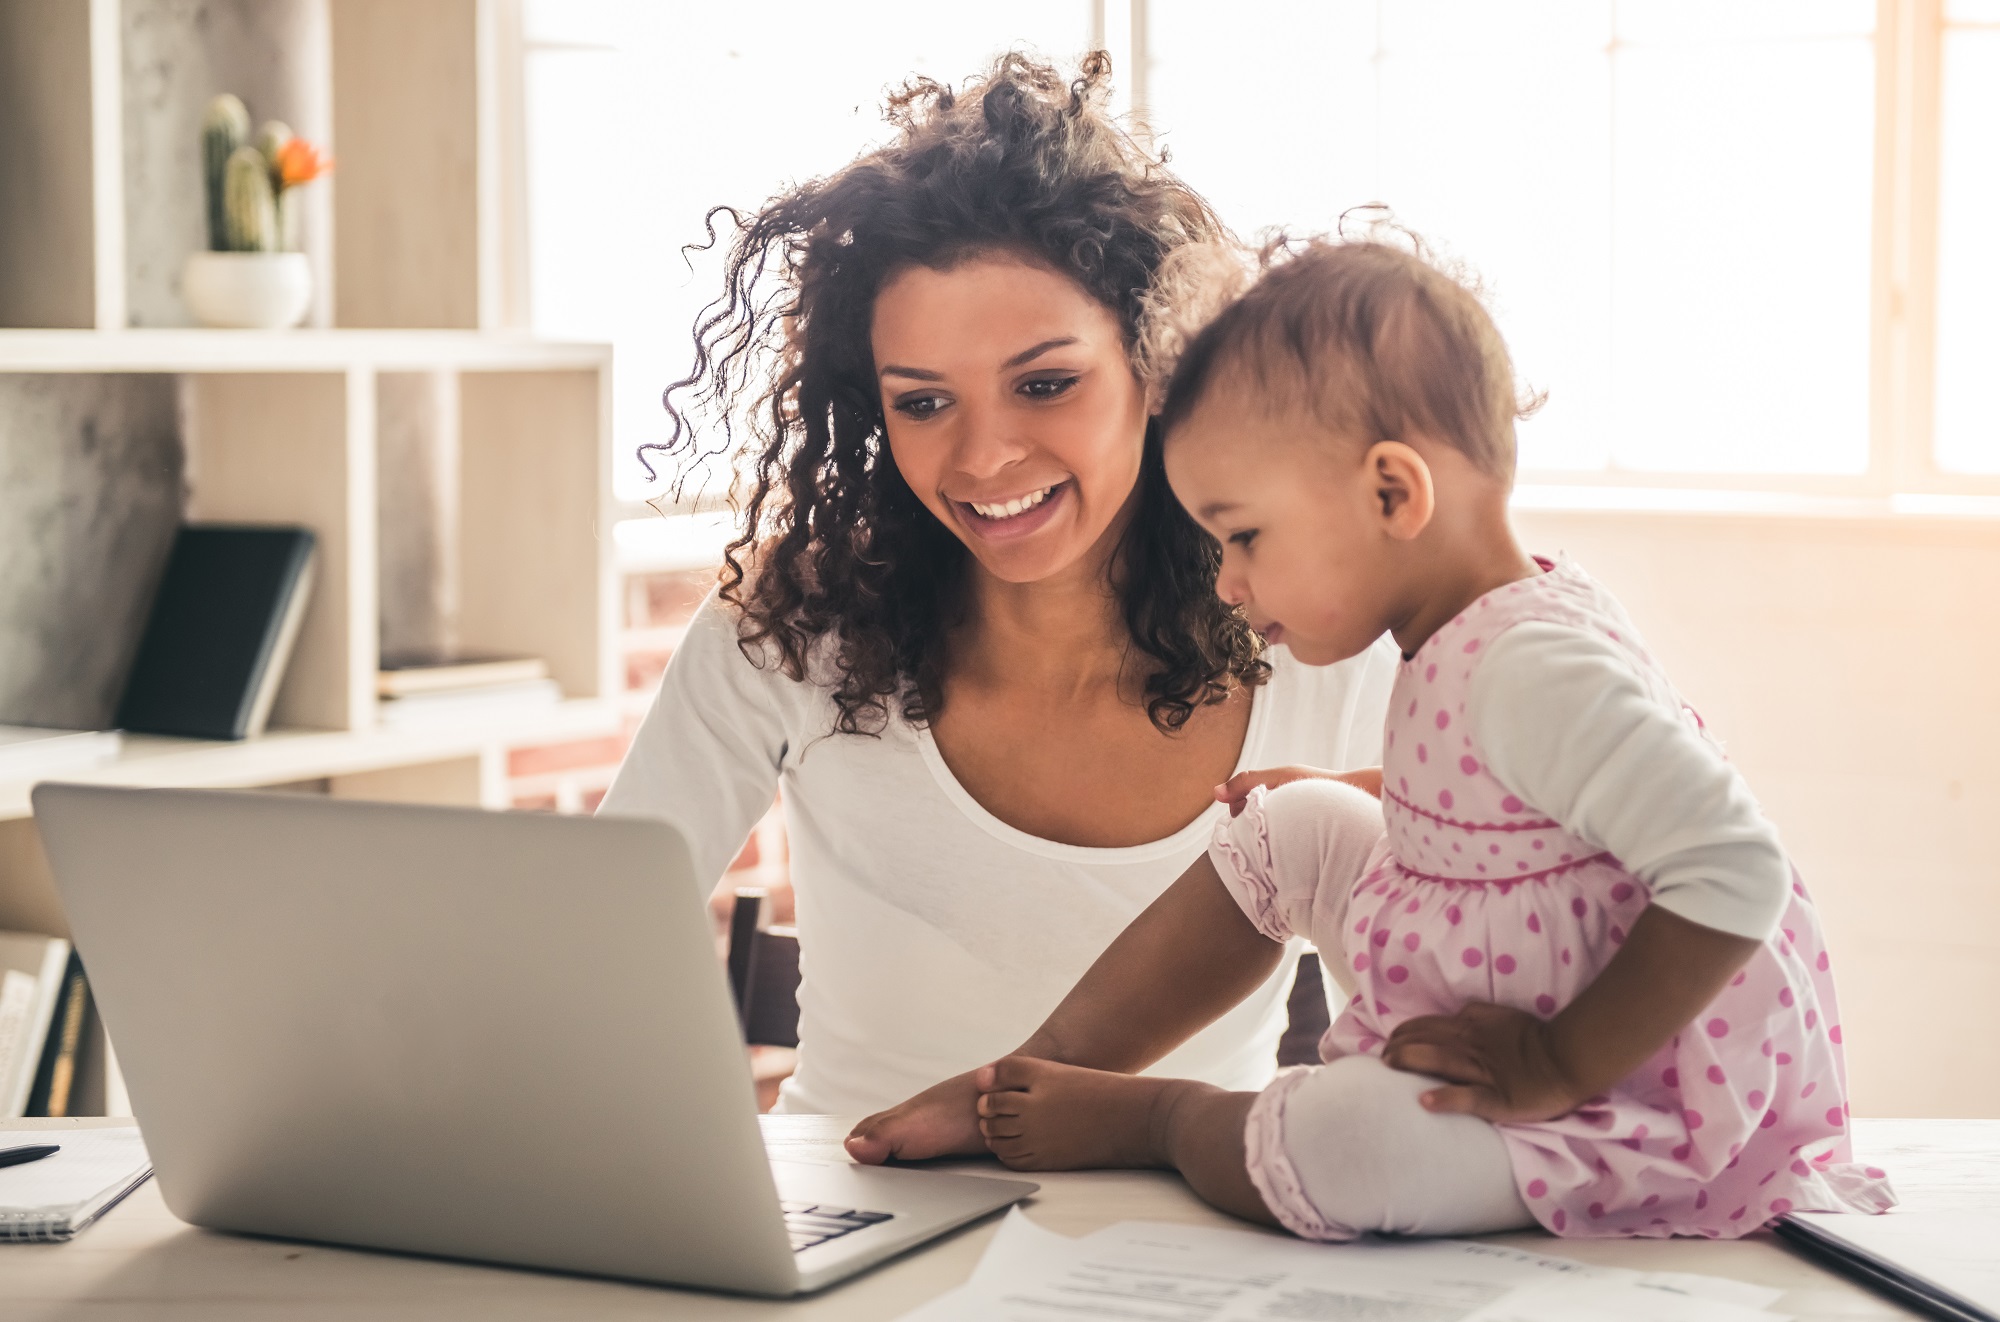 Woman and small baby looking at laptop screen in living room